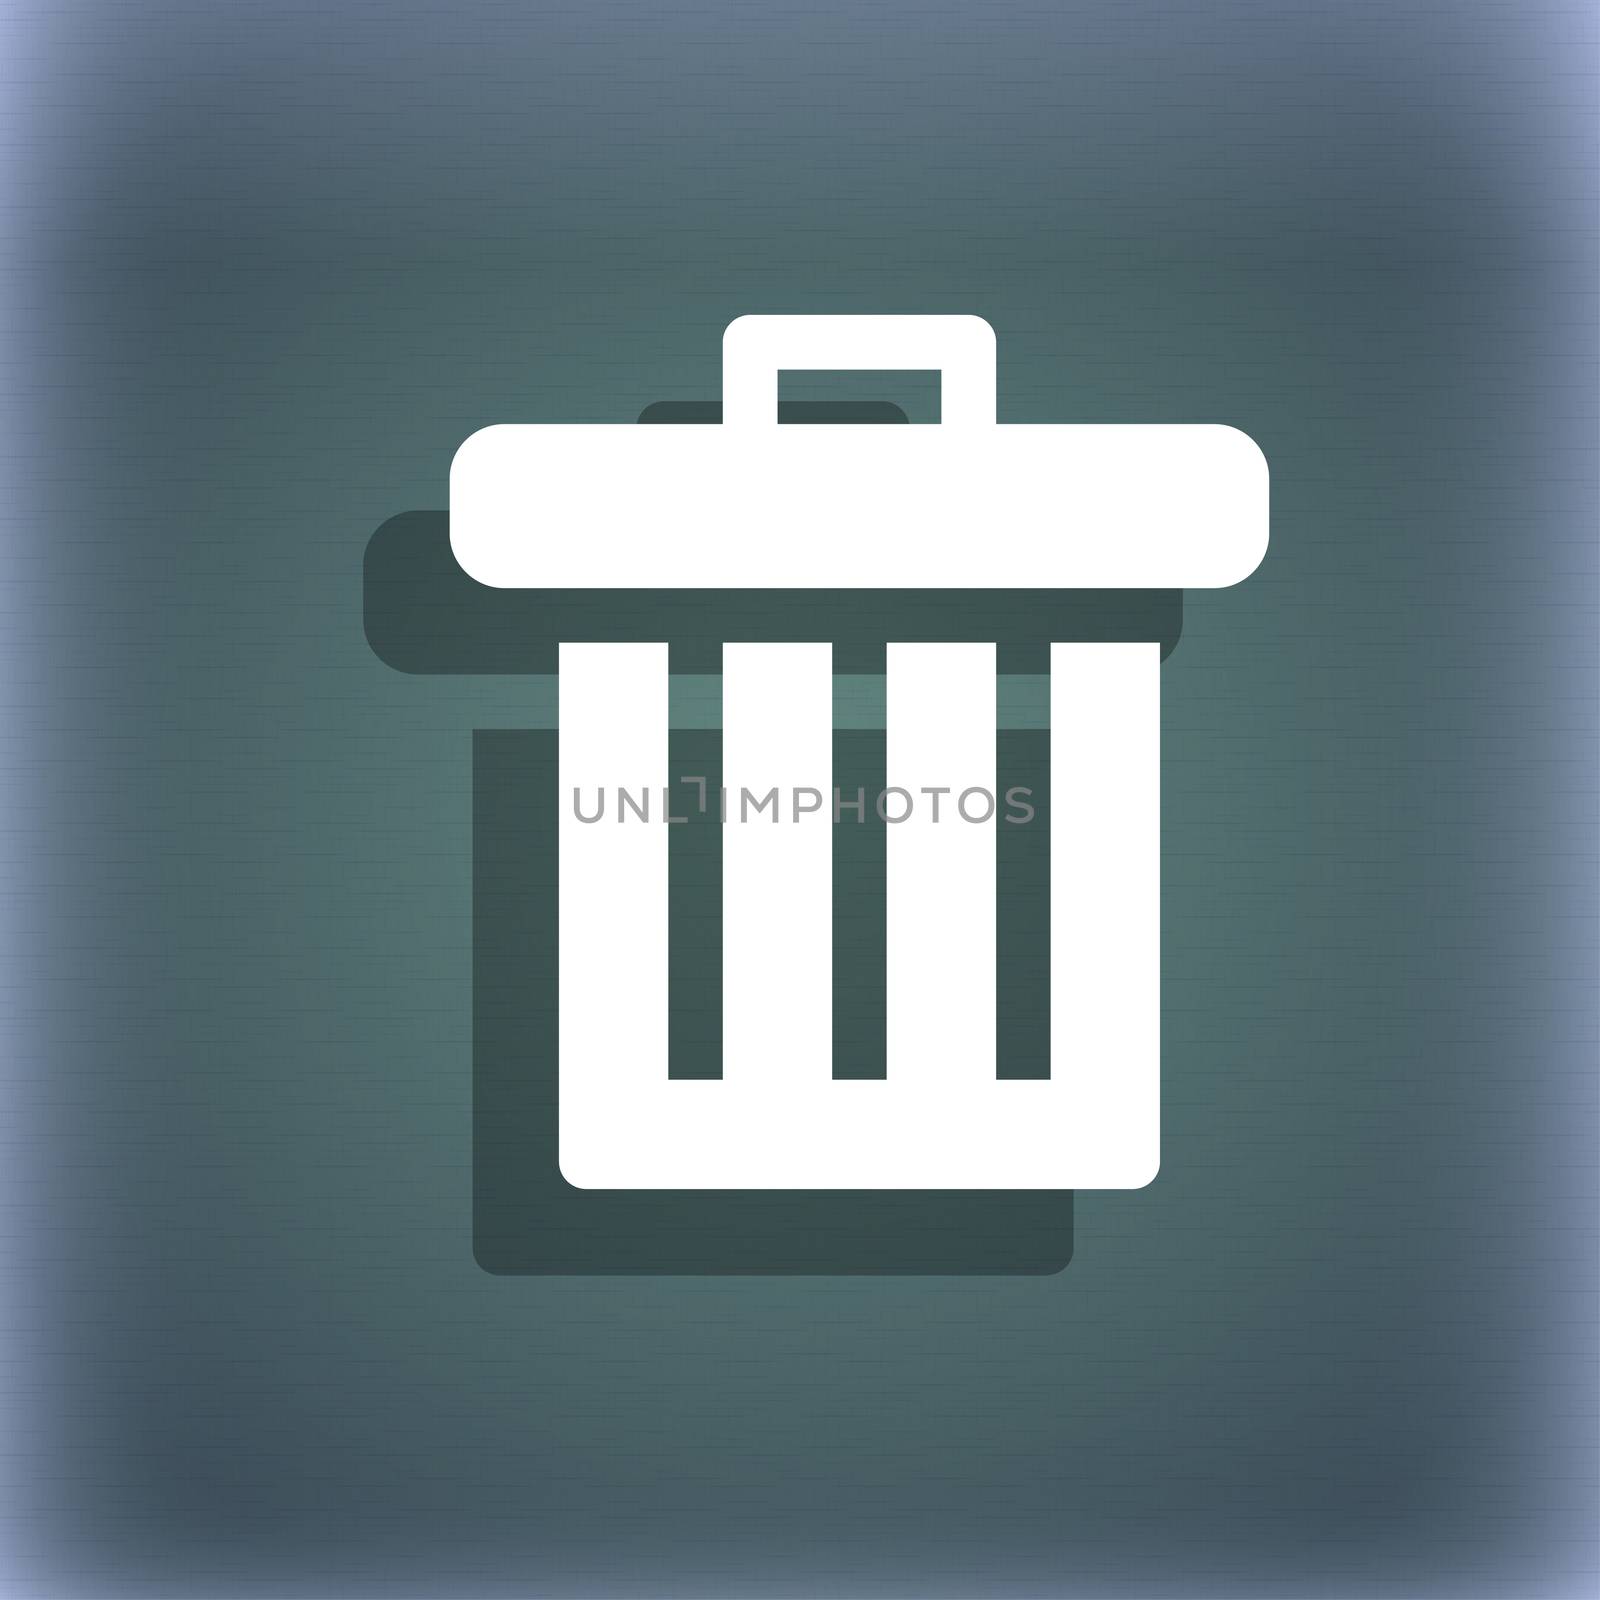 Recycle bin icon symbol on the blue-green abstract background with shadow and space for your text. illustration